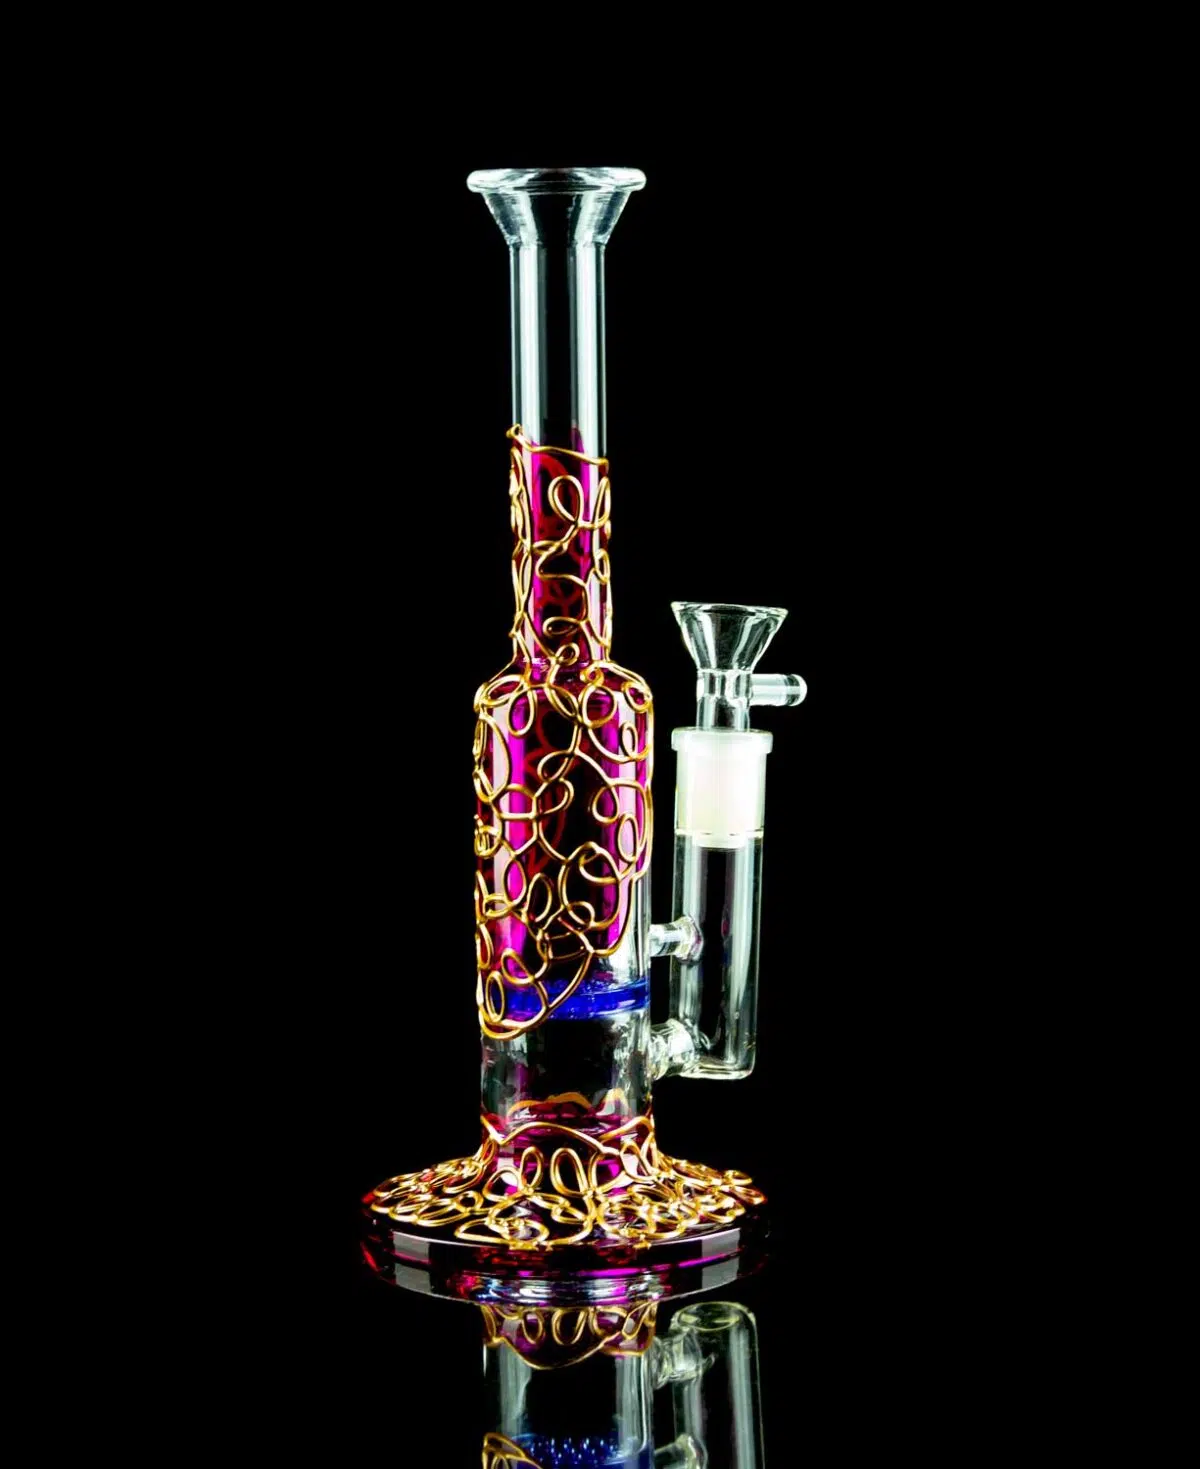 honeycomb percolator bong with gold lace design